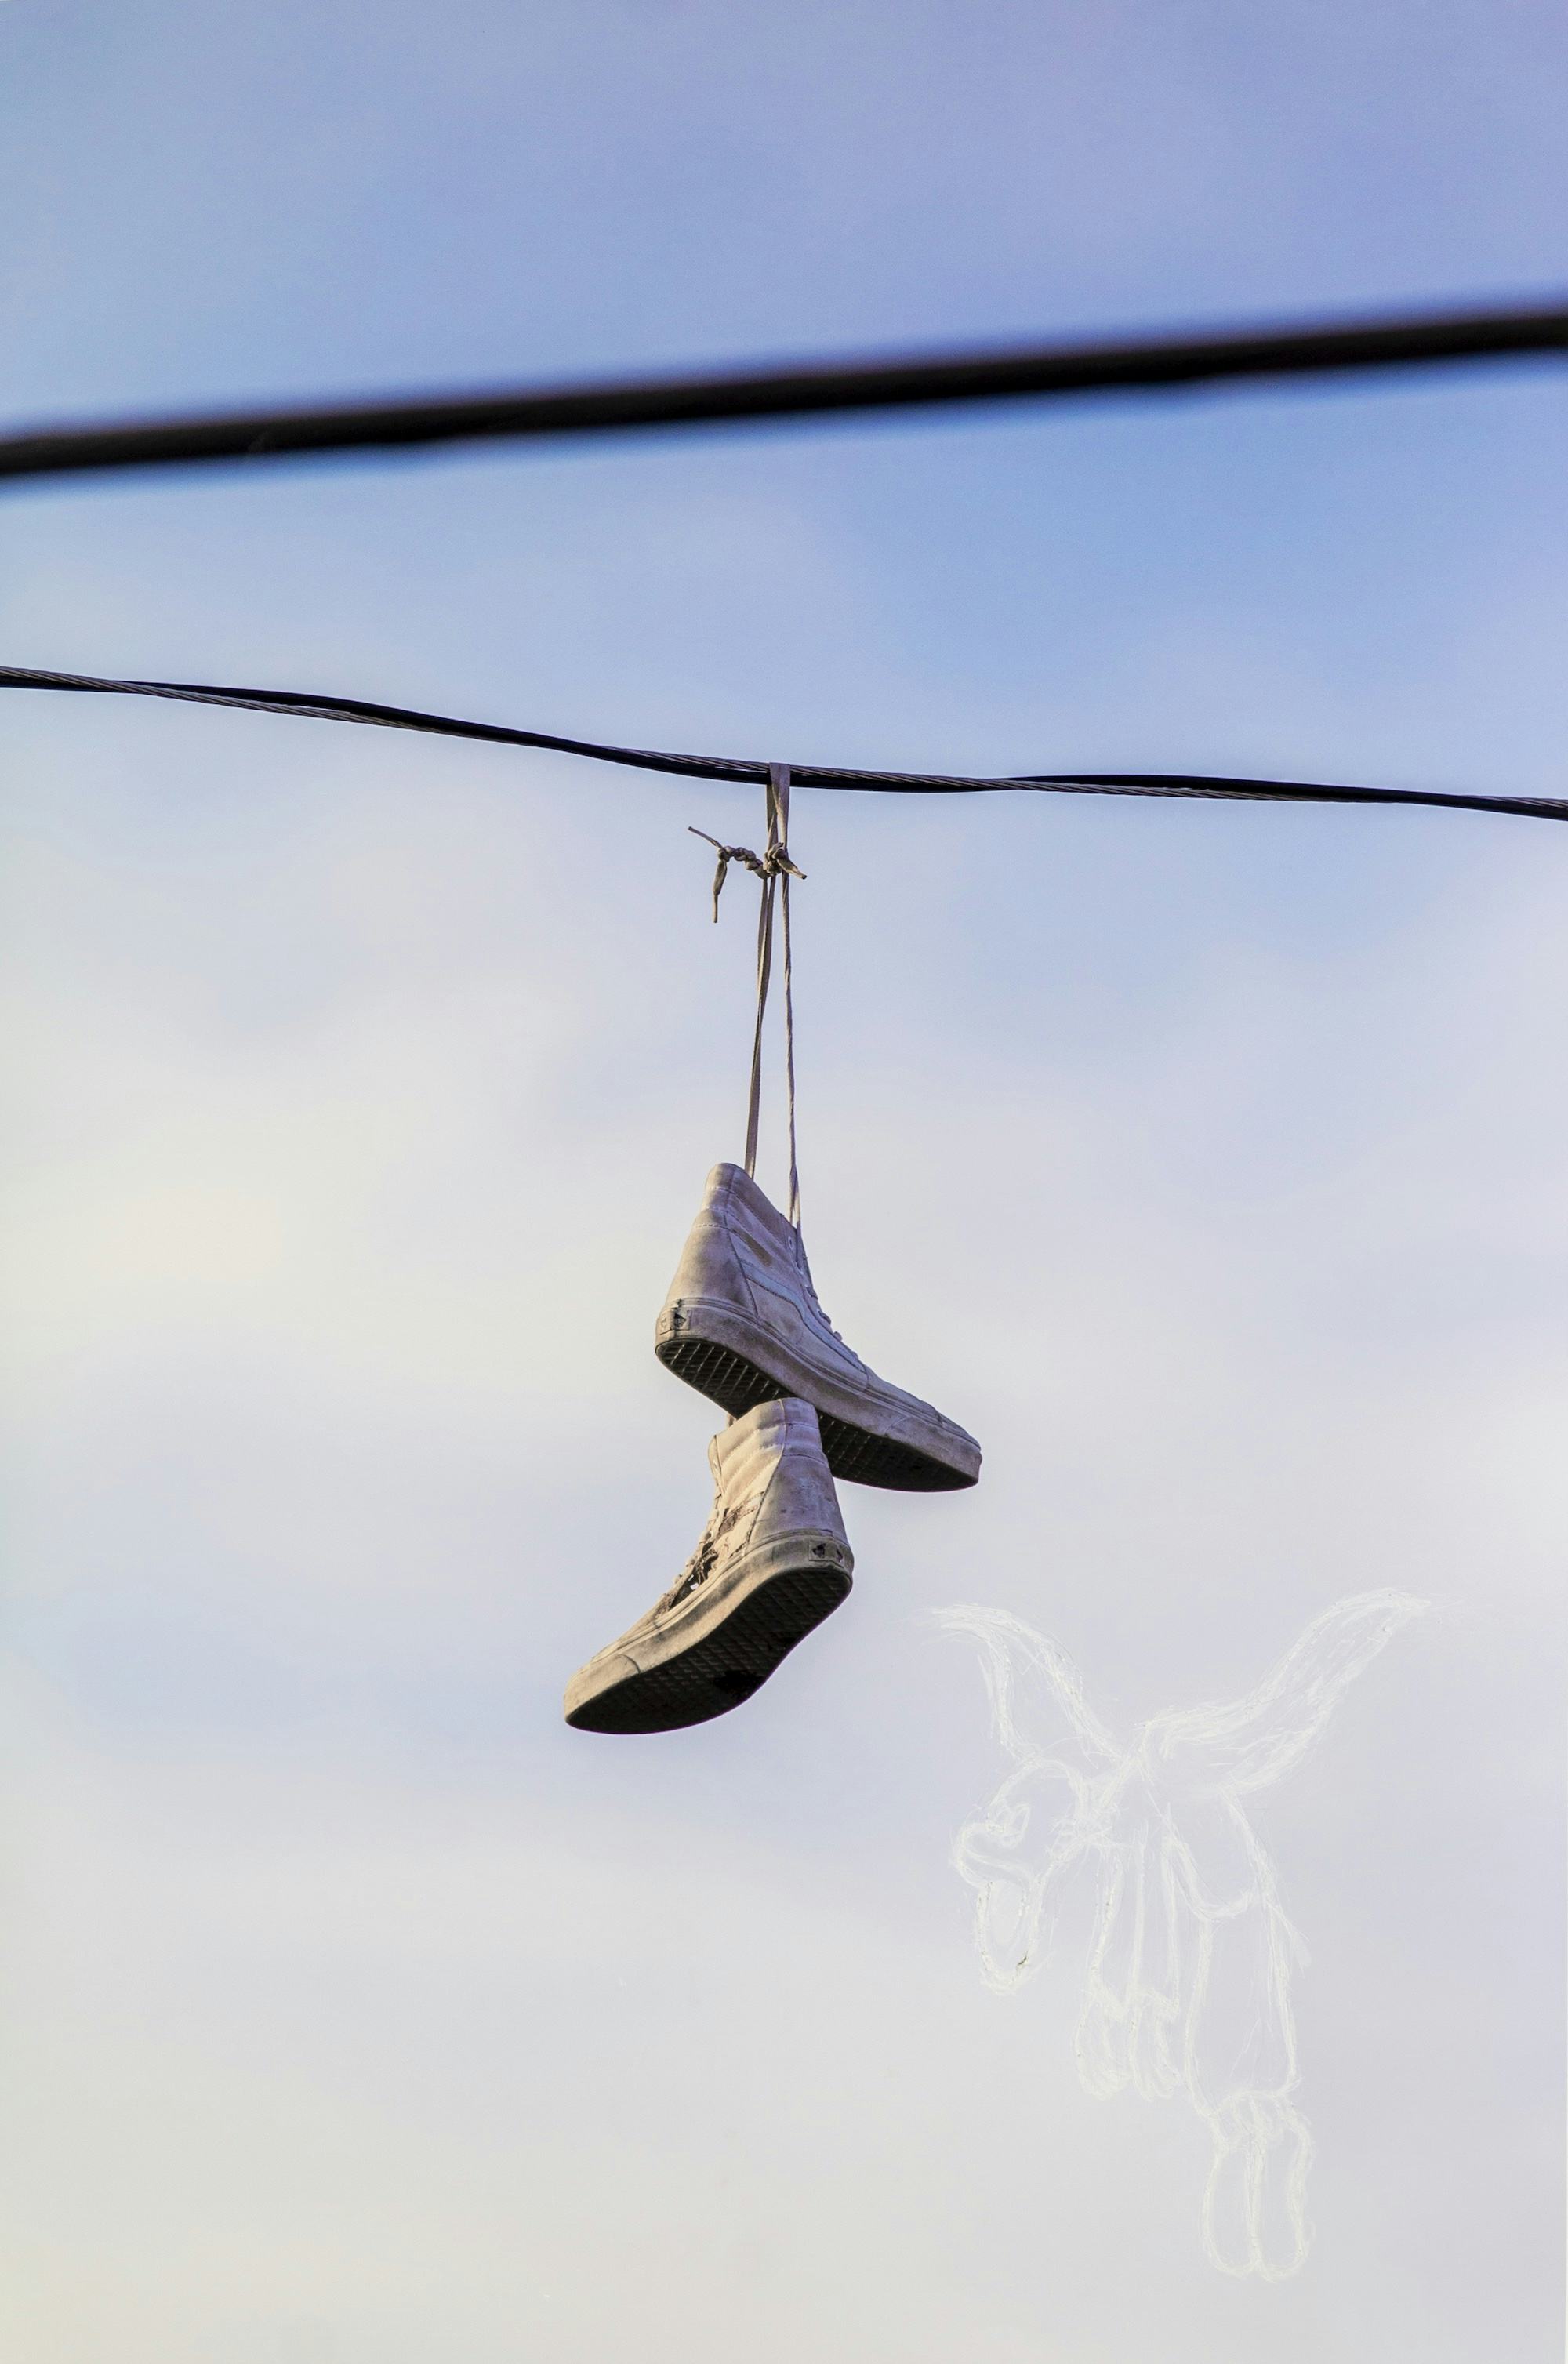 Picture of a pair of shoes hanging from a cord in the sky © André Ramos-Woodard